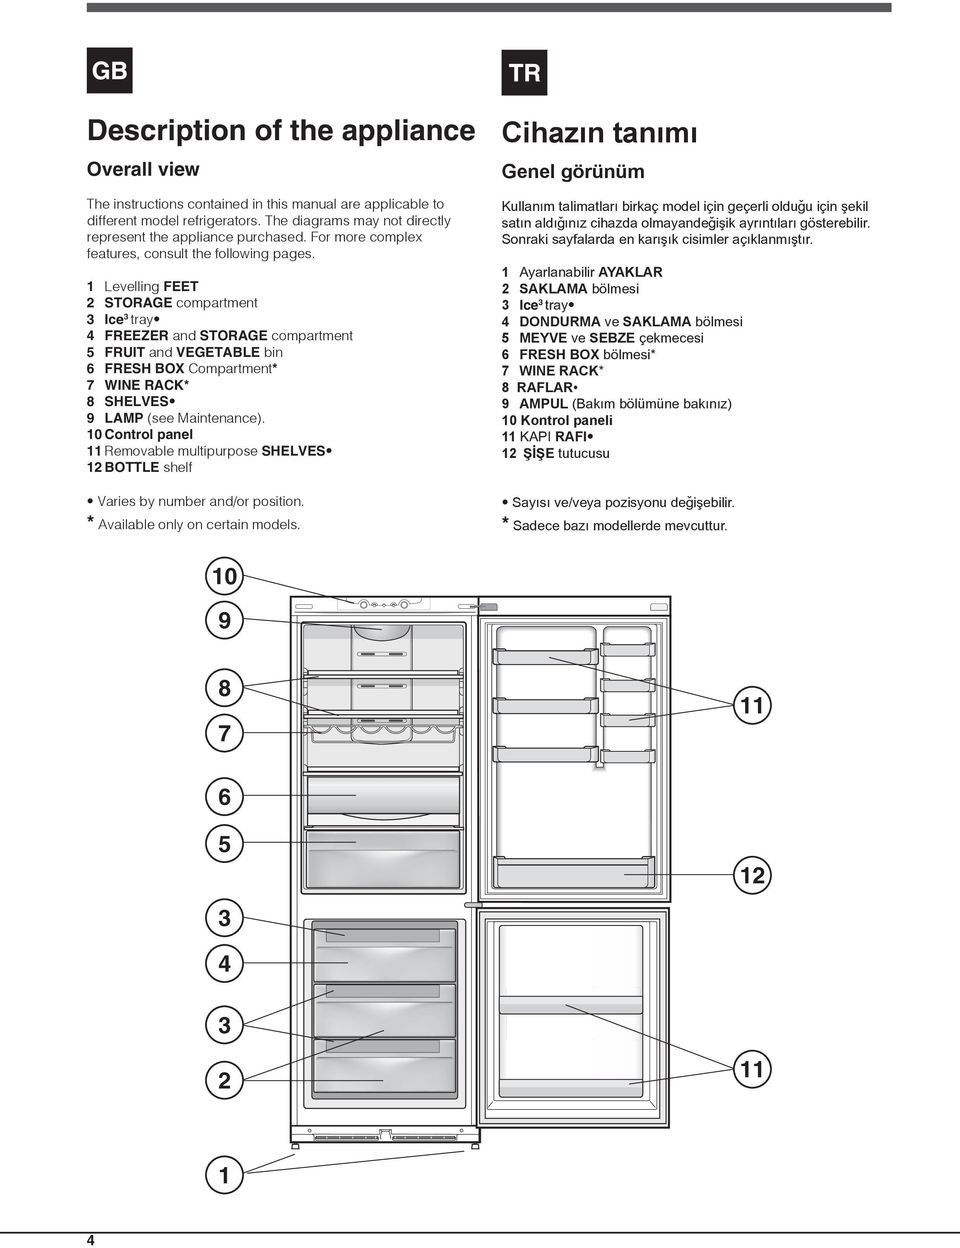 1 Levelling FEET 2 STORAGE compartment 3 Ice 3 tray 4 FREEZER and STORAGE compartment 5 FRUIT and VEGETABLE bin 6 FRESH BOX Compartment* 7 WINE RACK* 8 SHELVES 9 LAMP (see Maintenance).